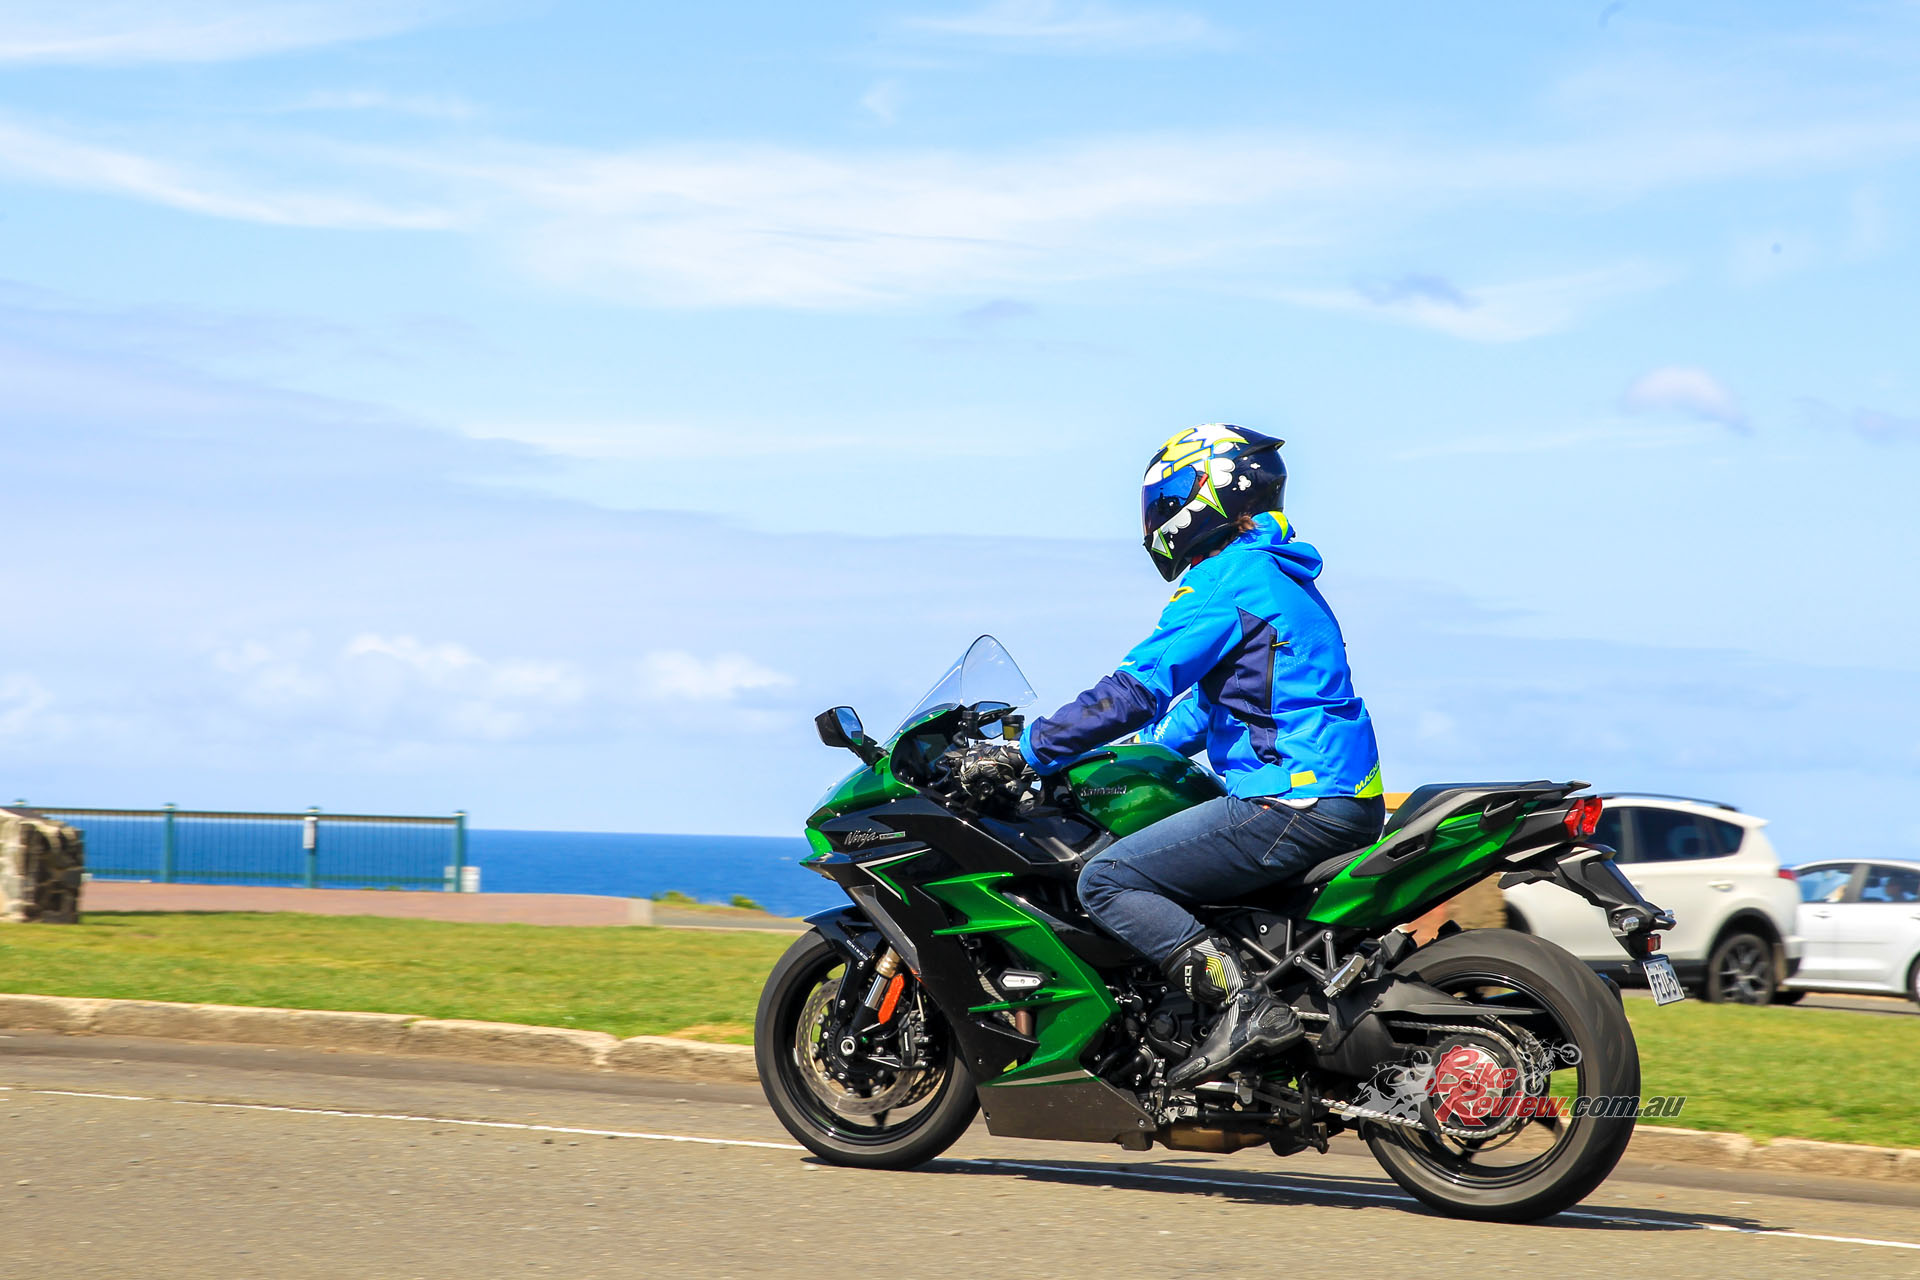 "You don’t sit like you would a sportsbike, the rider triangle is closer to a nakedbike than anything as the seat is quite low and the ‘bars are higher than conventional clips-on."